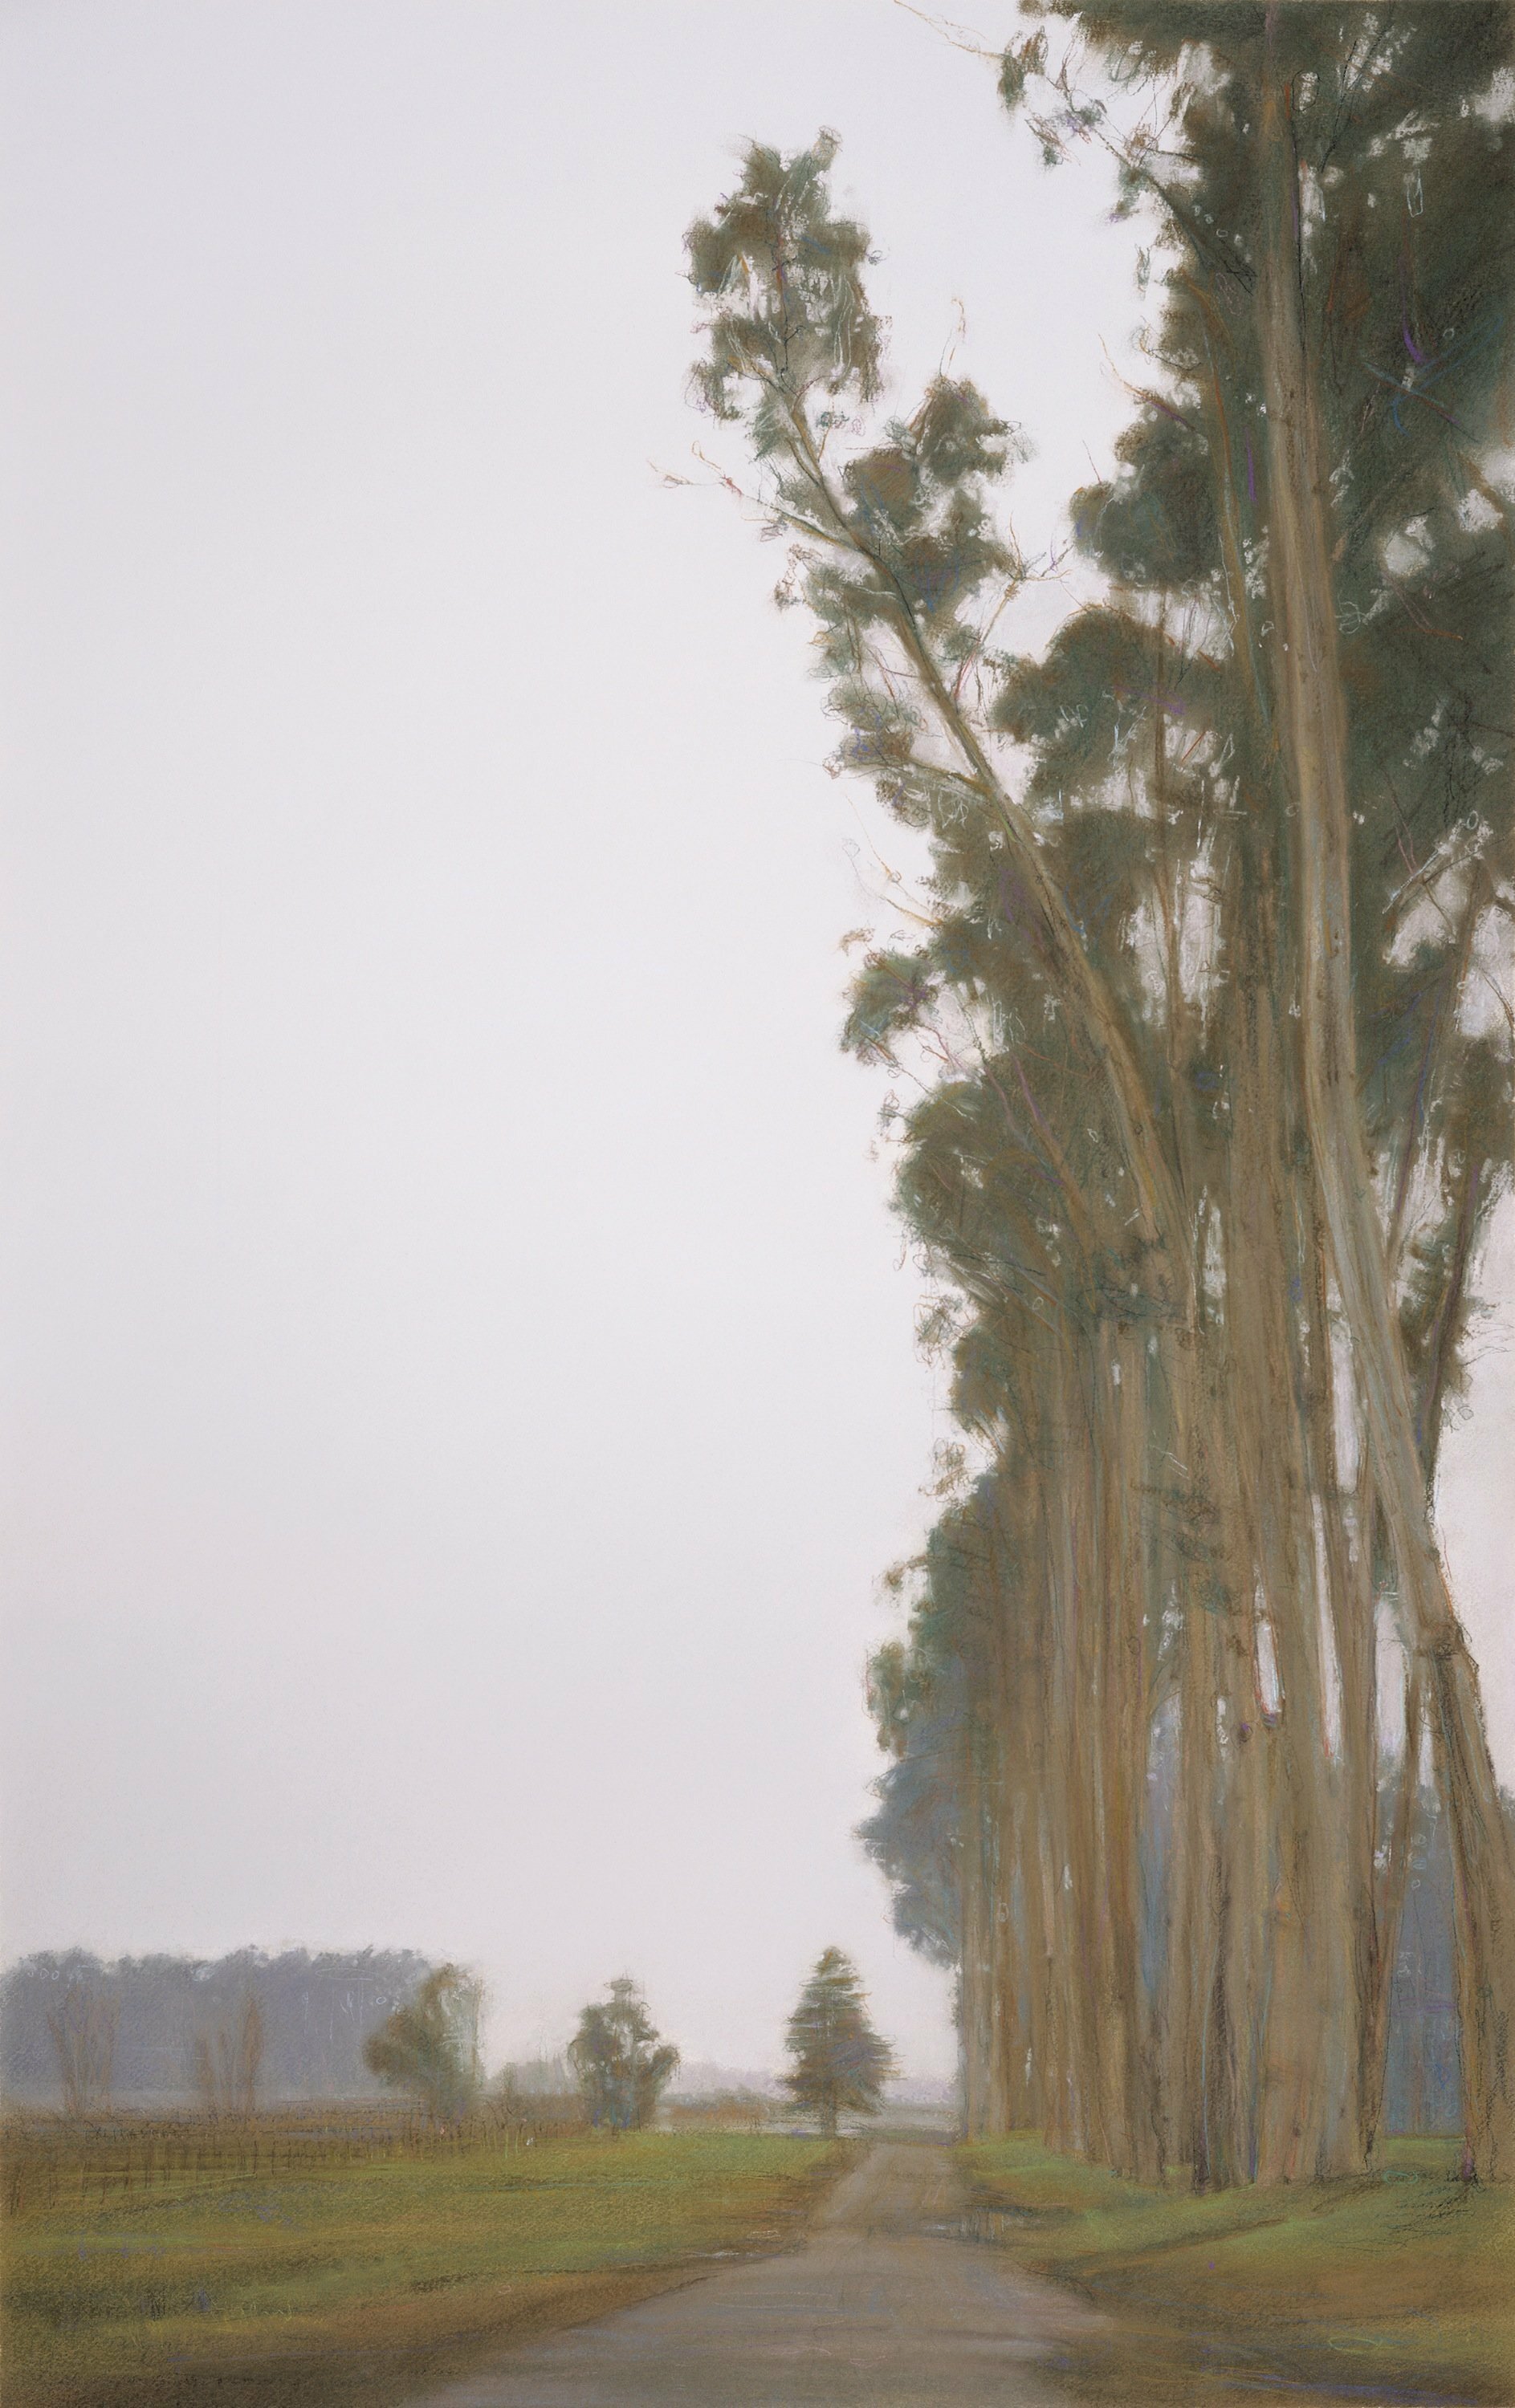 Steven Gordon; Stanly Lane, 2003, Original Giclee Reproduction, 19 x 31 inches. Artwork description: 241 This limited edition Giclee print is based on an original pastel painting is a view of a well known area in The Napa Valley.  The iconic long row of giant eucalyptus trees, on a road called Stanly Lane, sits majestically at the edge of the valley, bordering ...